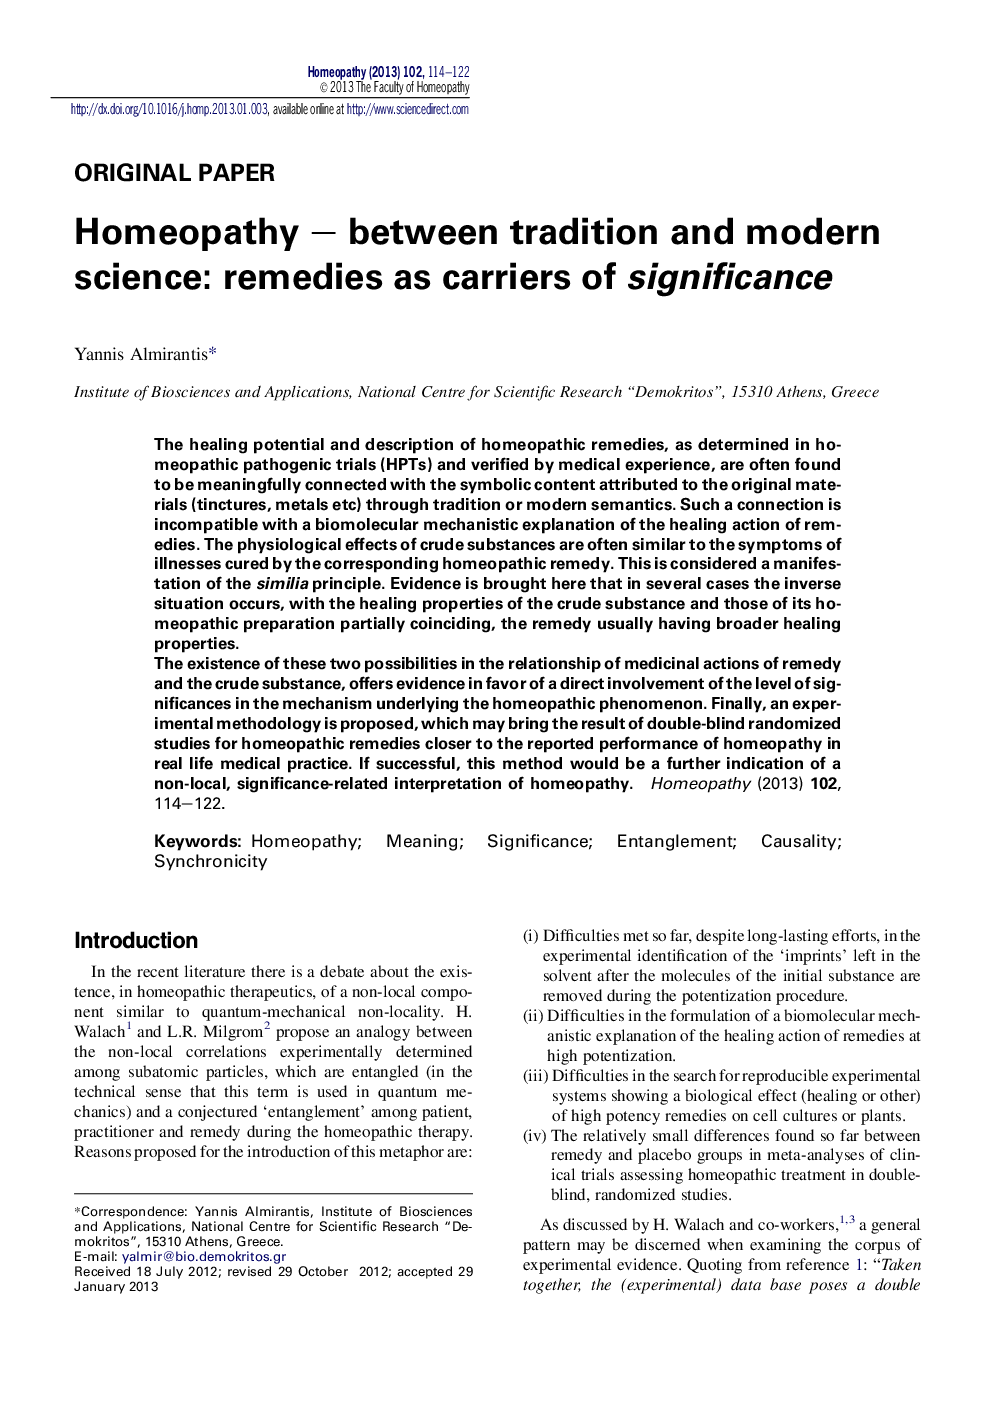 Homeopathy – between tradition and modern science: remedies as carriers of significance